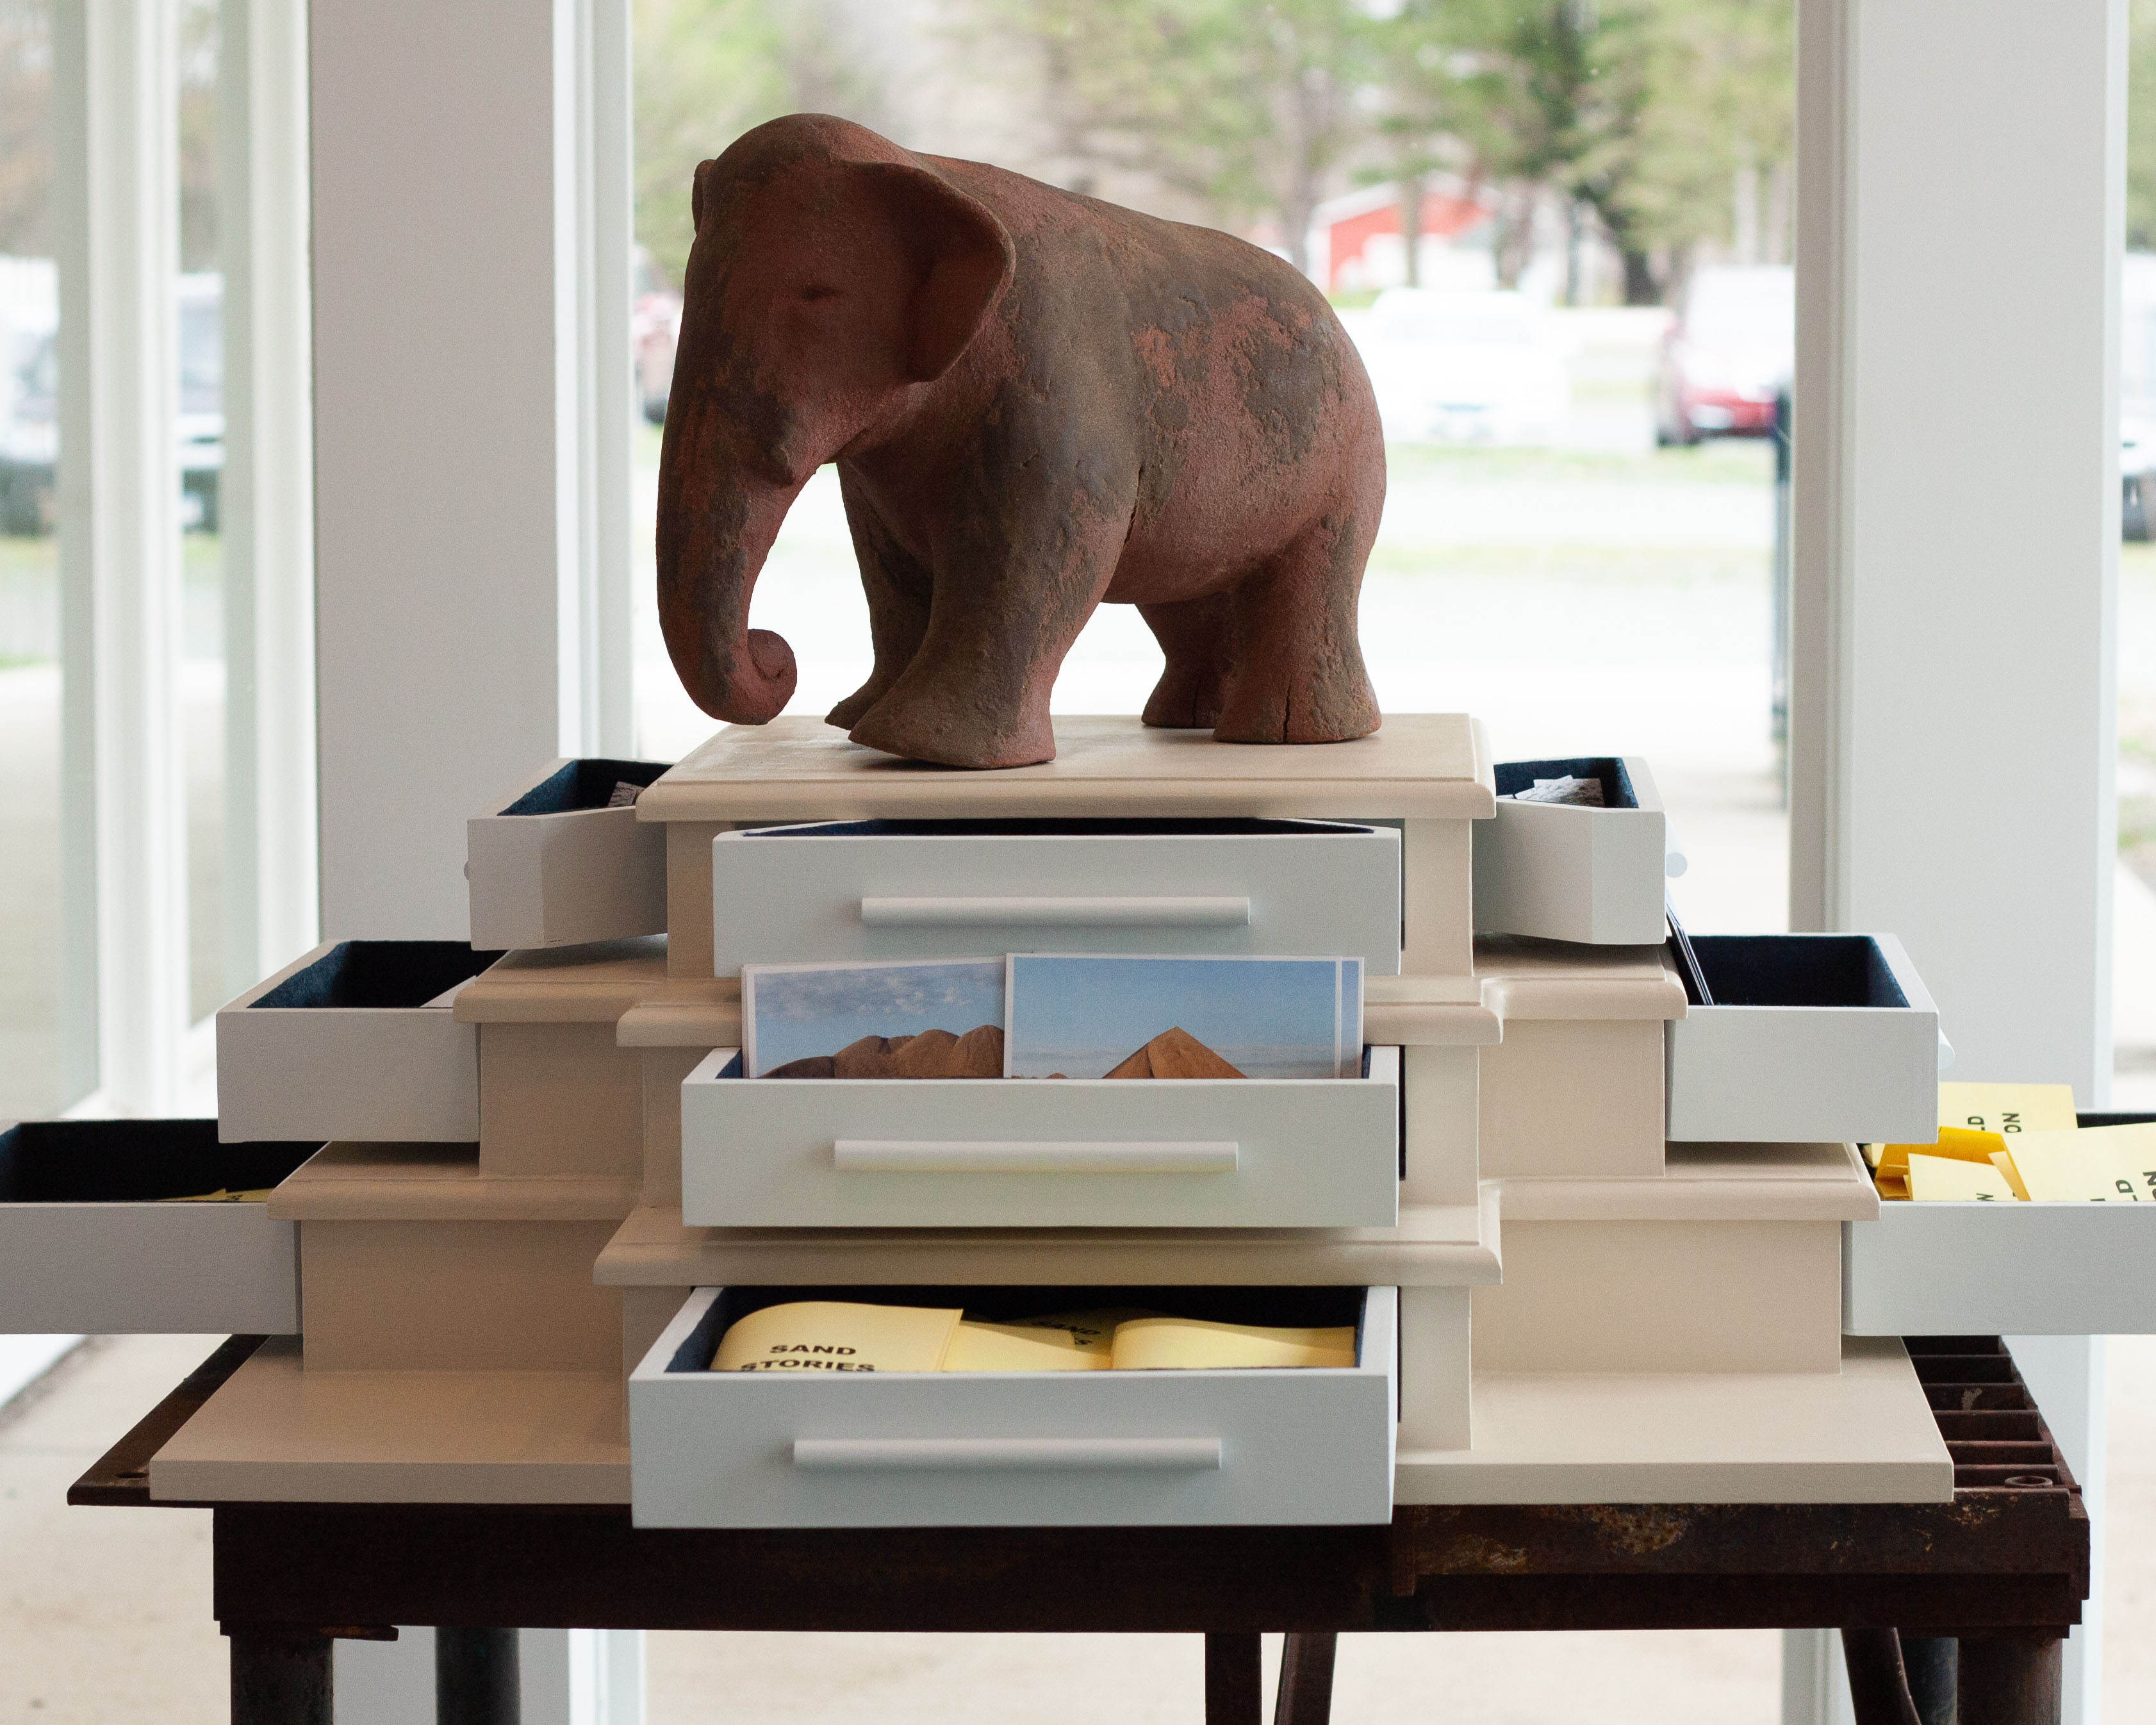 A sculpture of an elephant made with a brown clay covered with patches of sand sits on base with three levels of drawers. The drawers are opened and peeking out are postcards with sandy landscape photos on them, and yellow booklets that are laid flat.